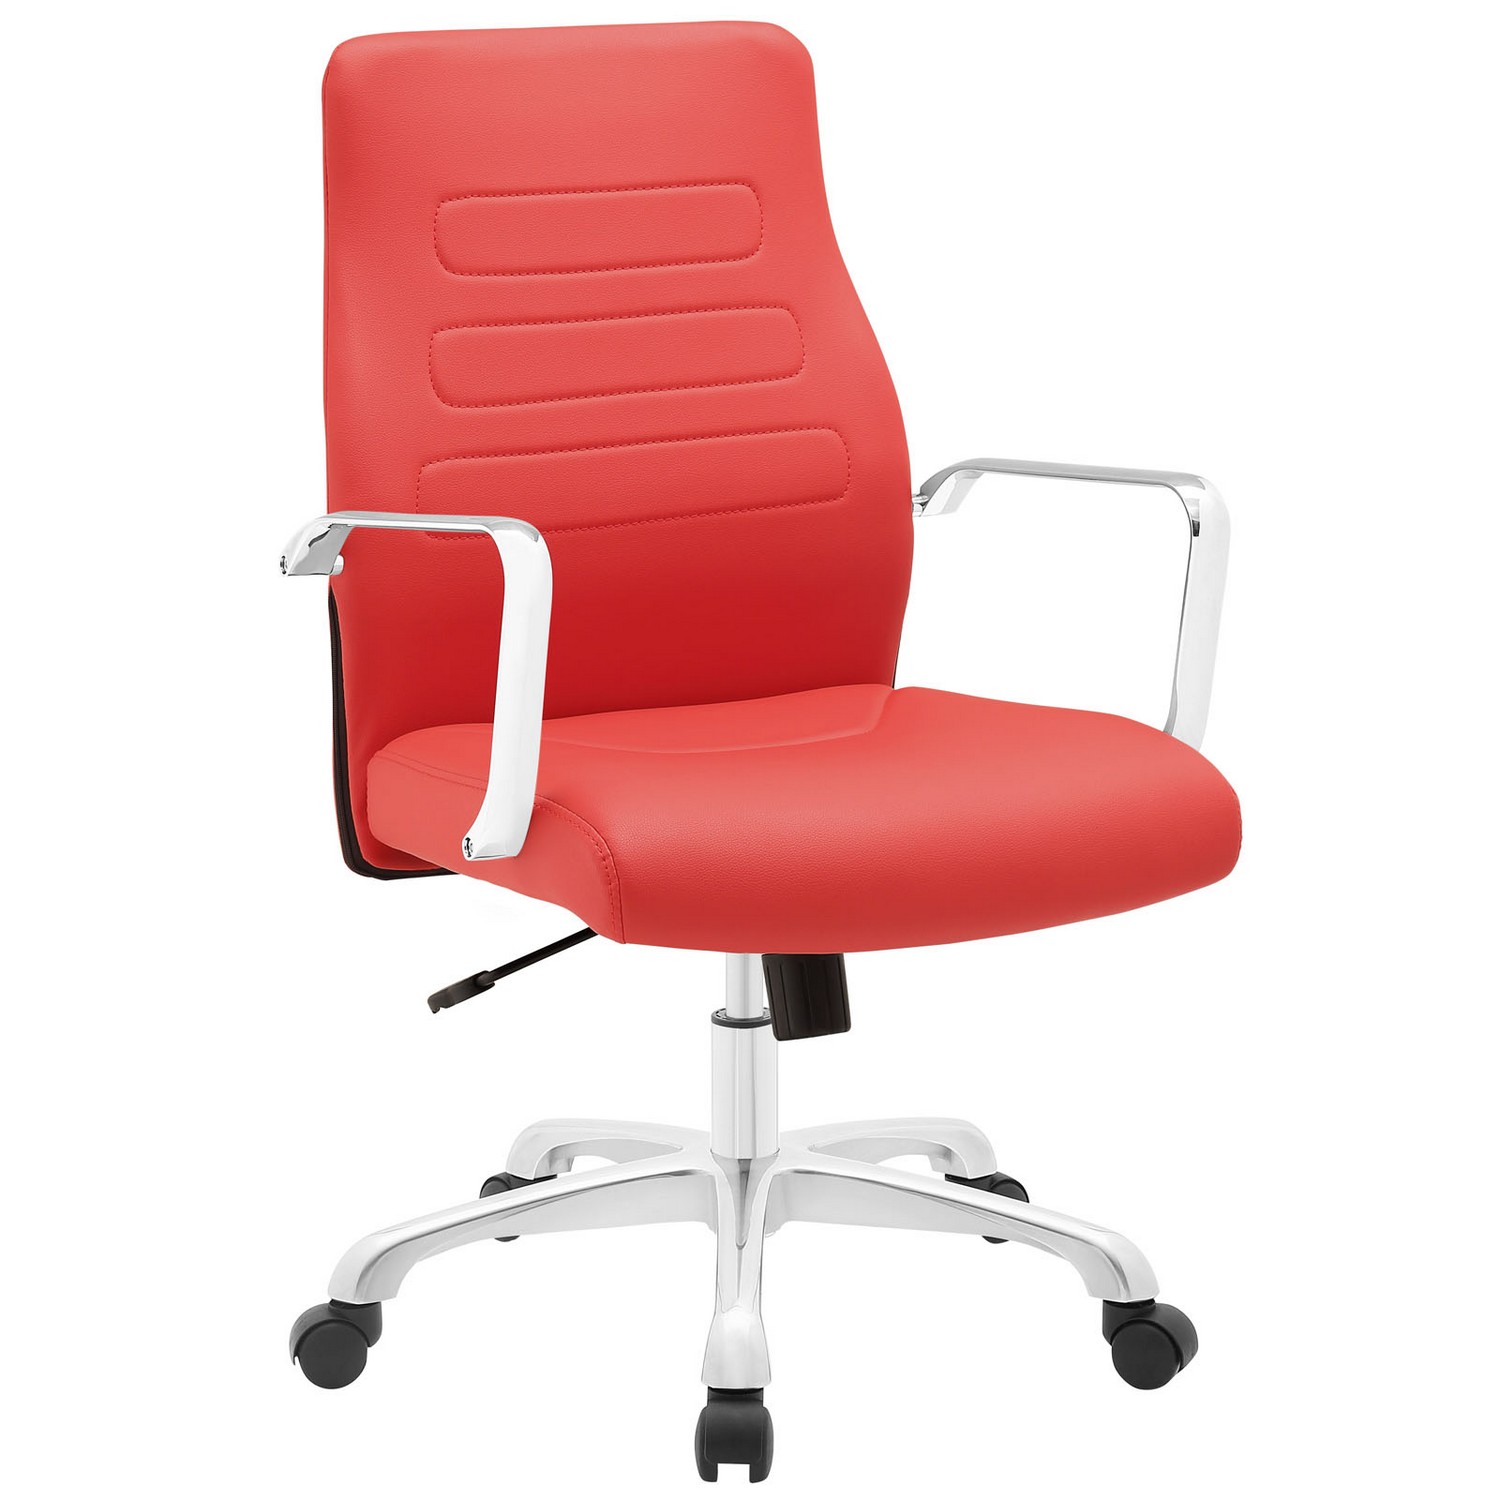 Modway Depict Mid Back Aluminum Office Chair - Red